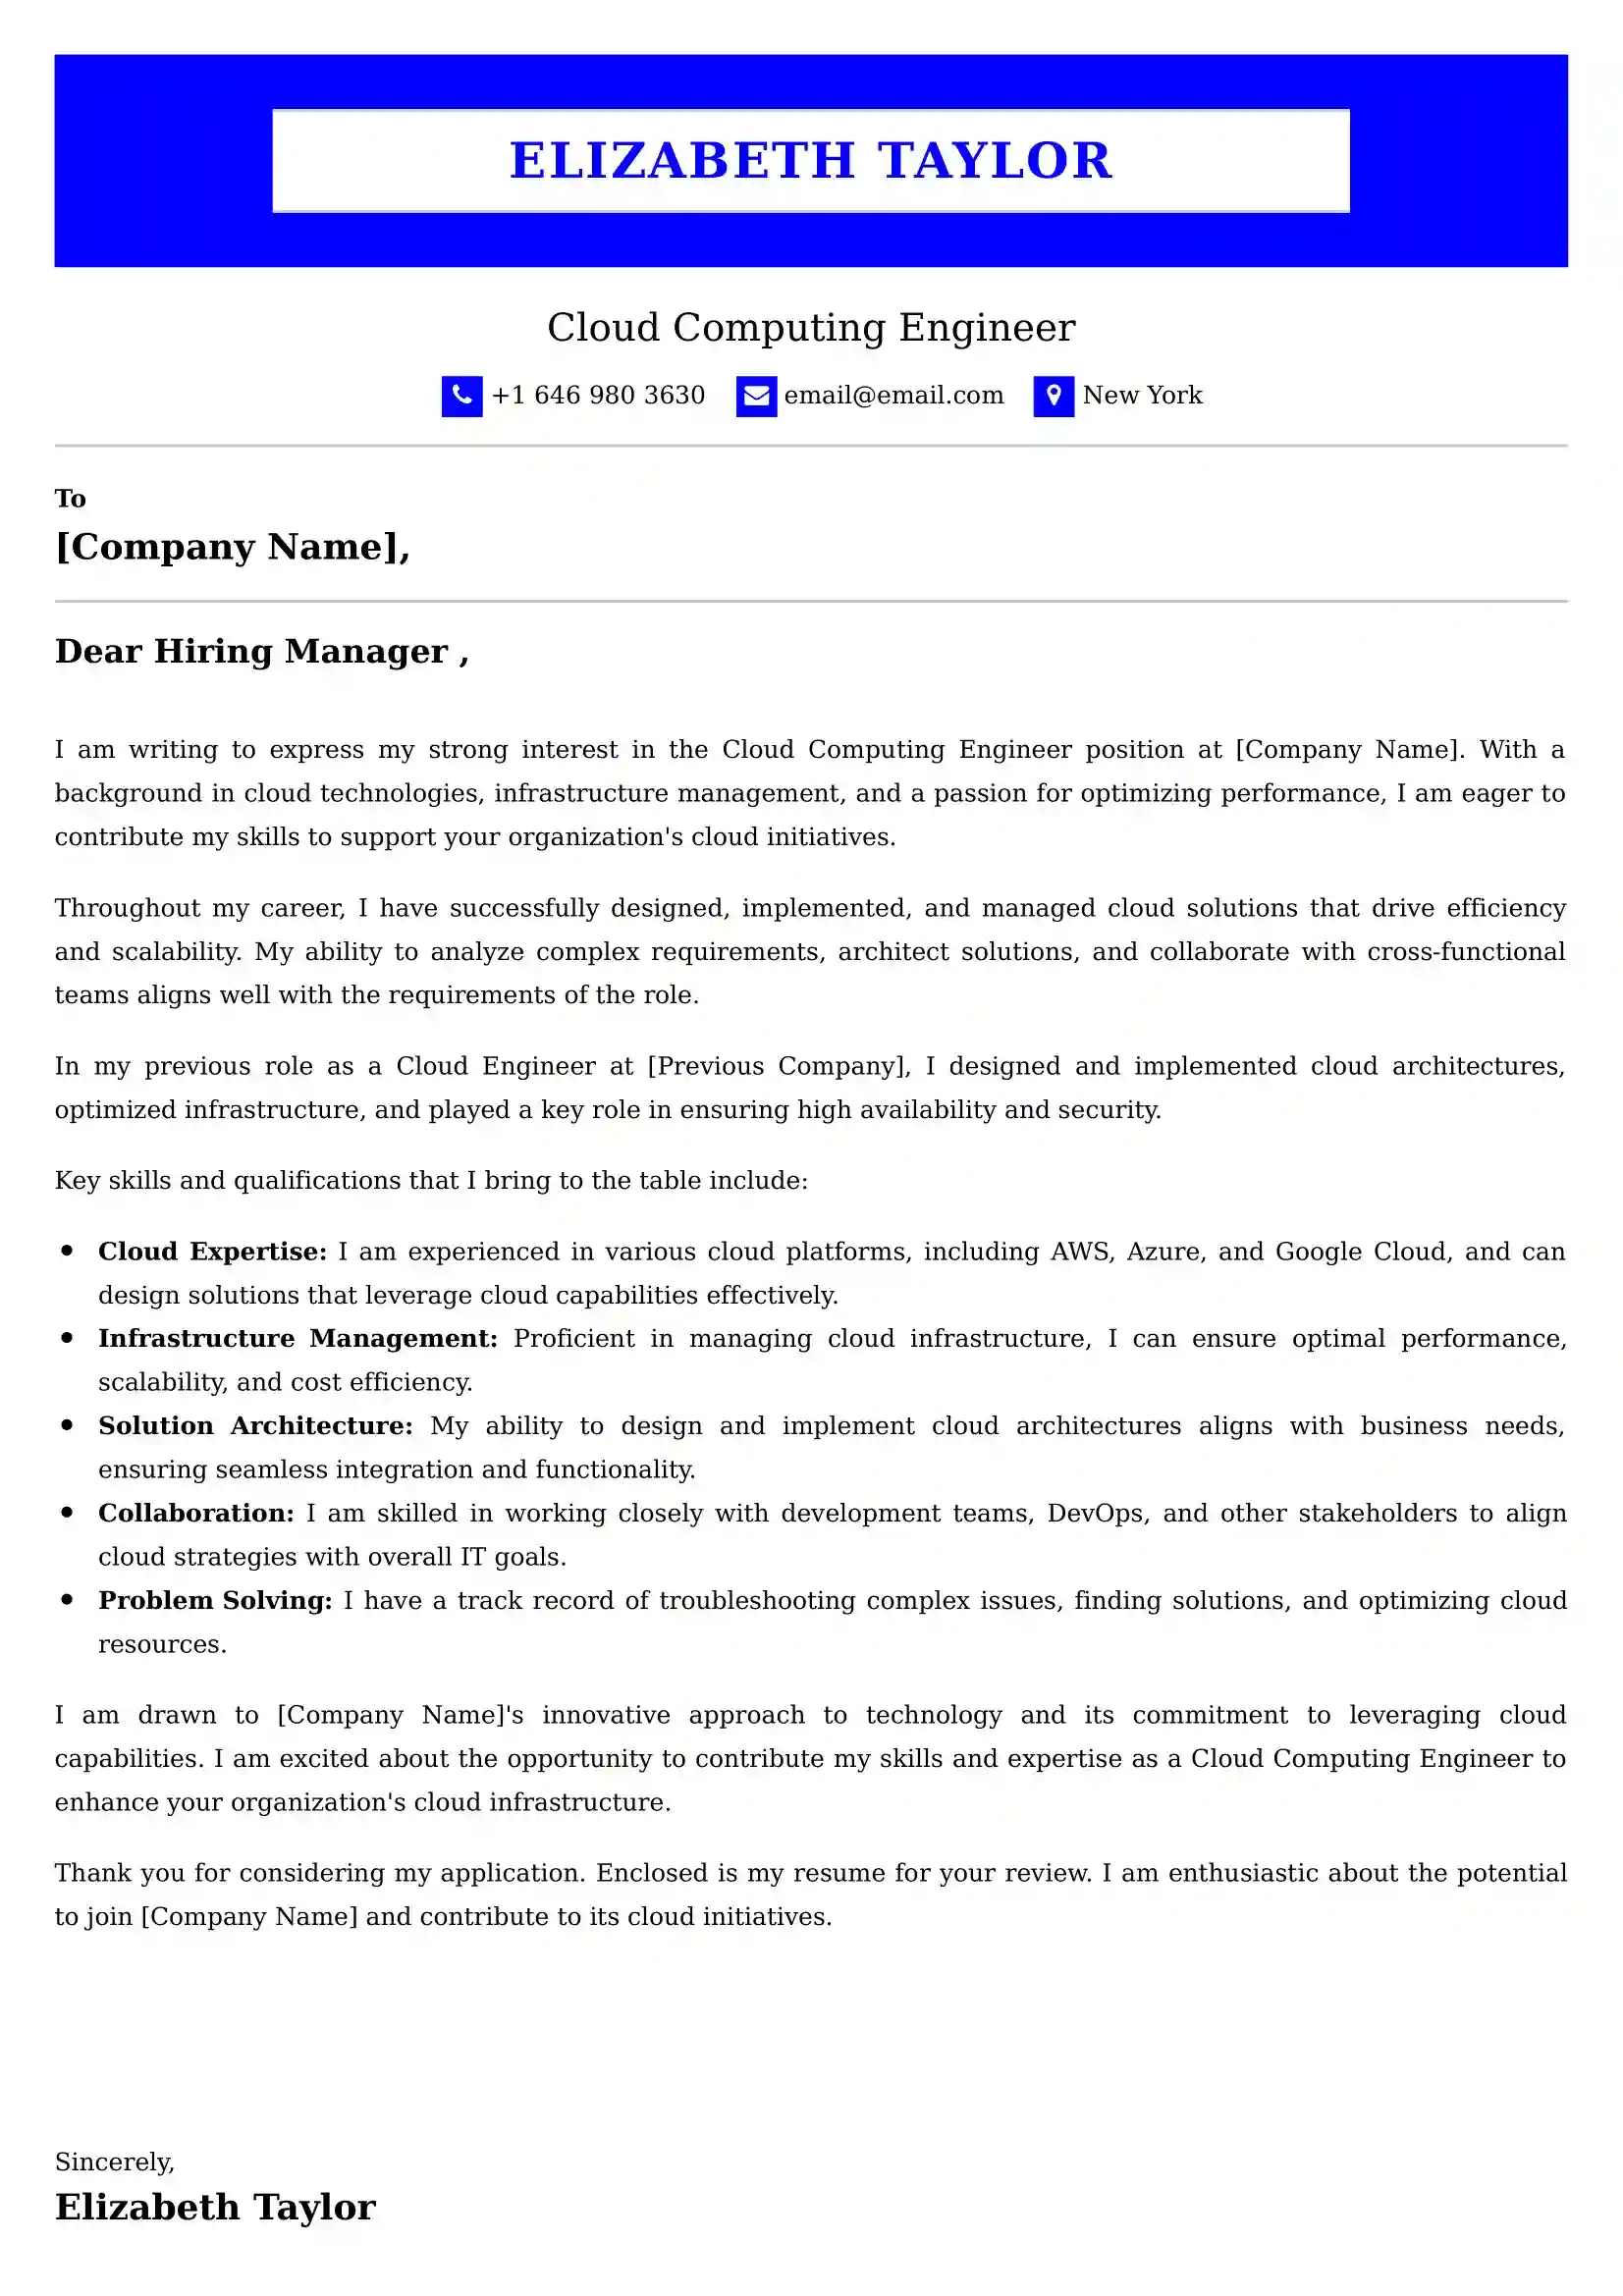 Cloud Computing Engineer Cover Letter Examples for UAE 